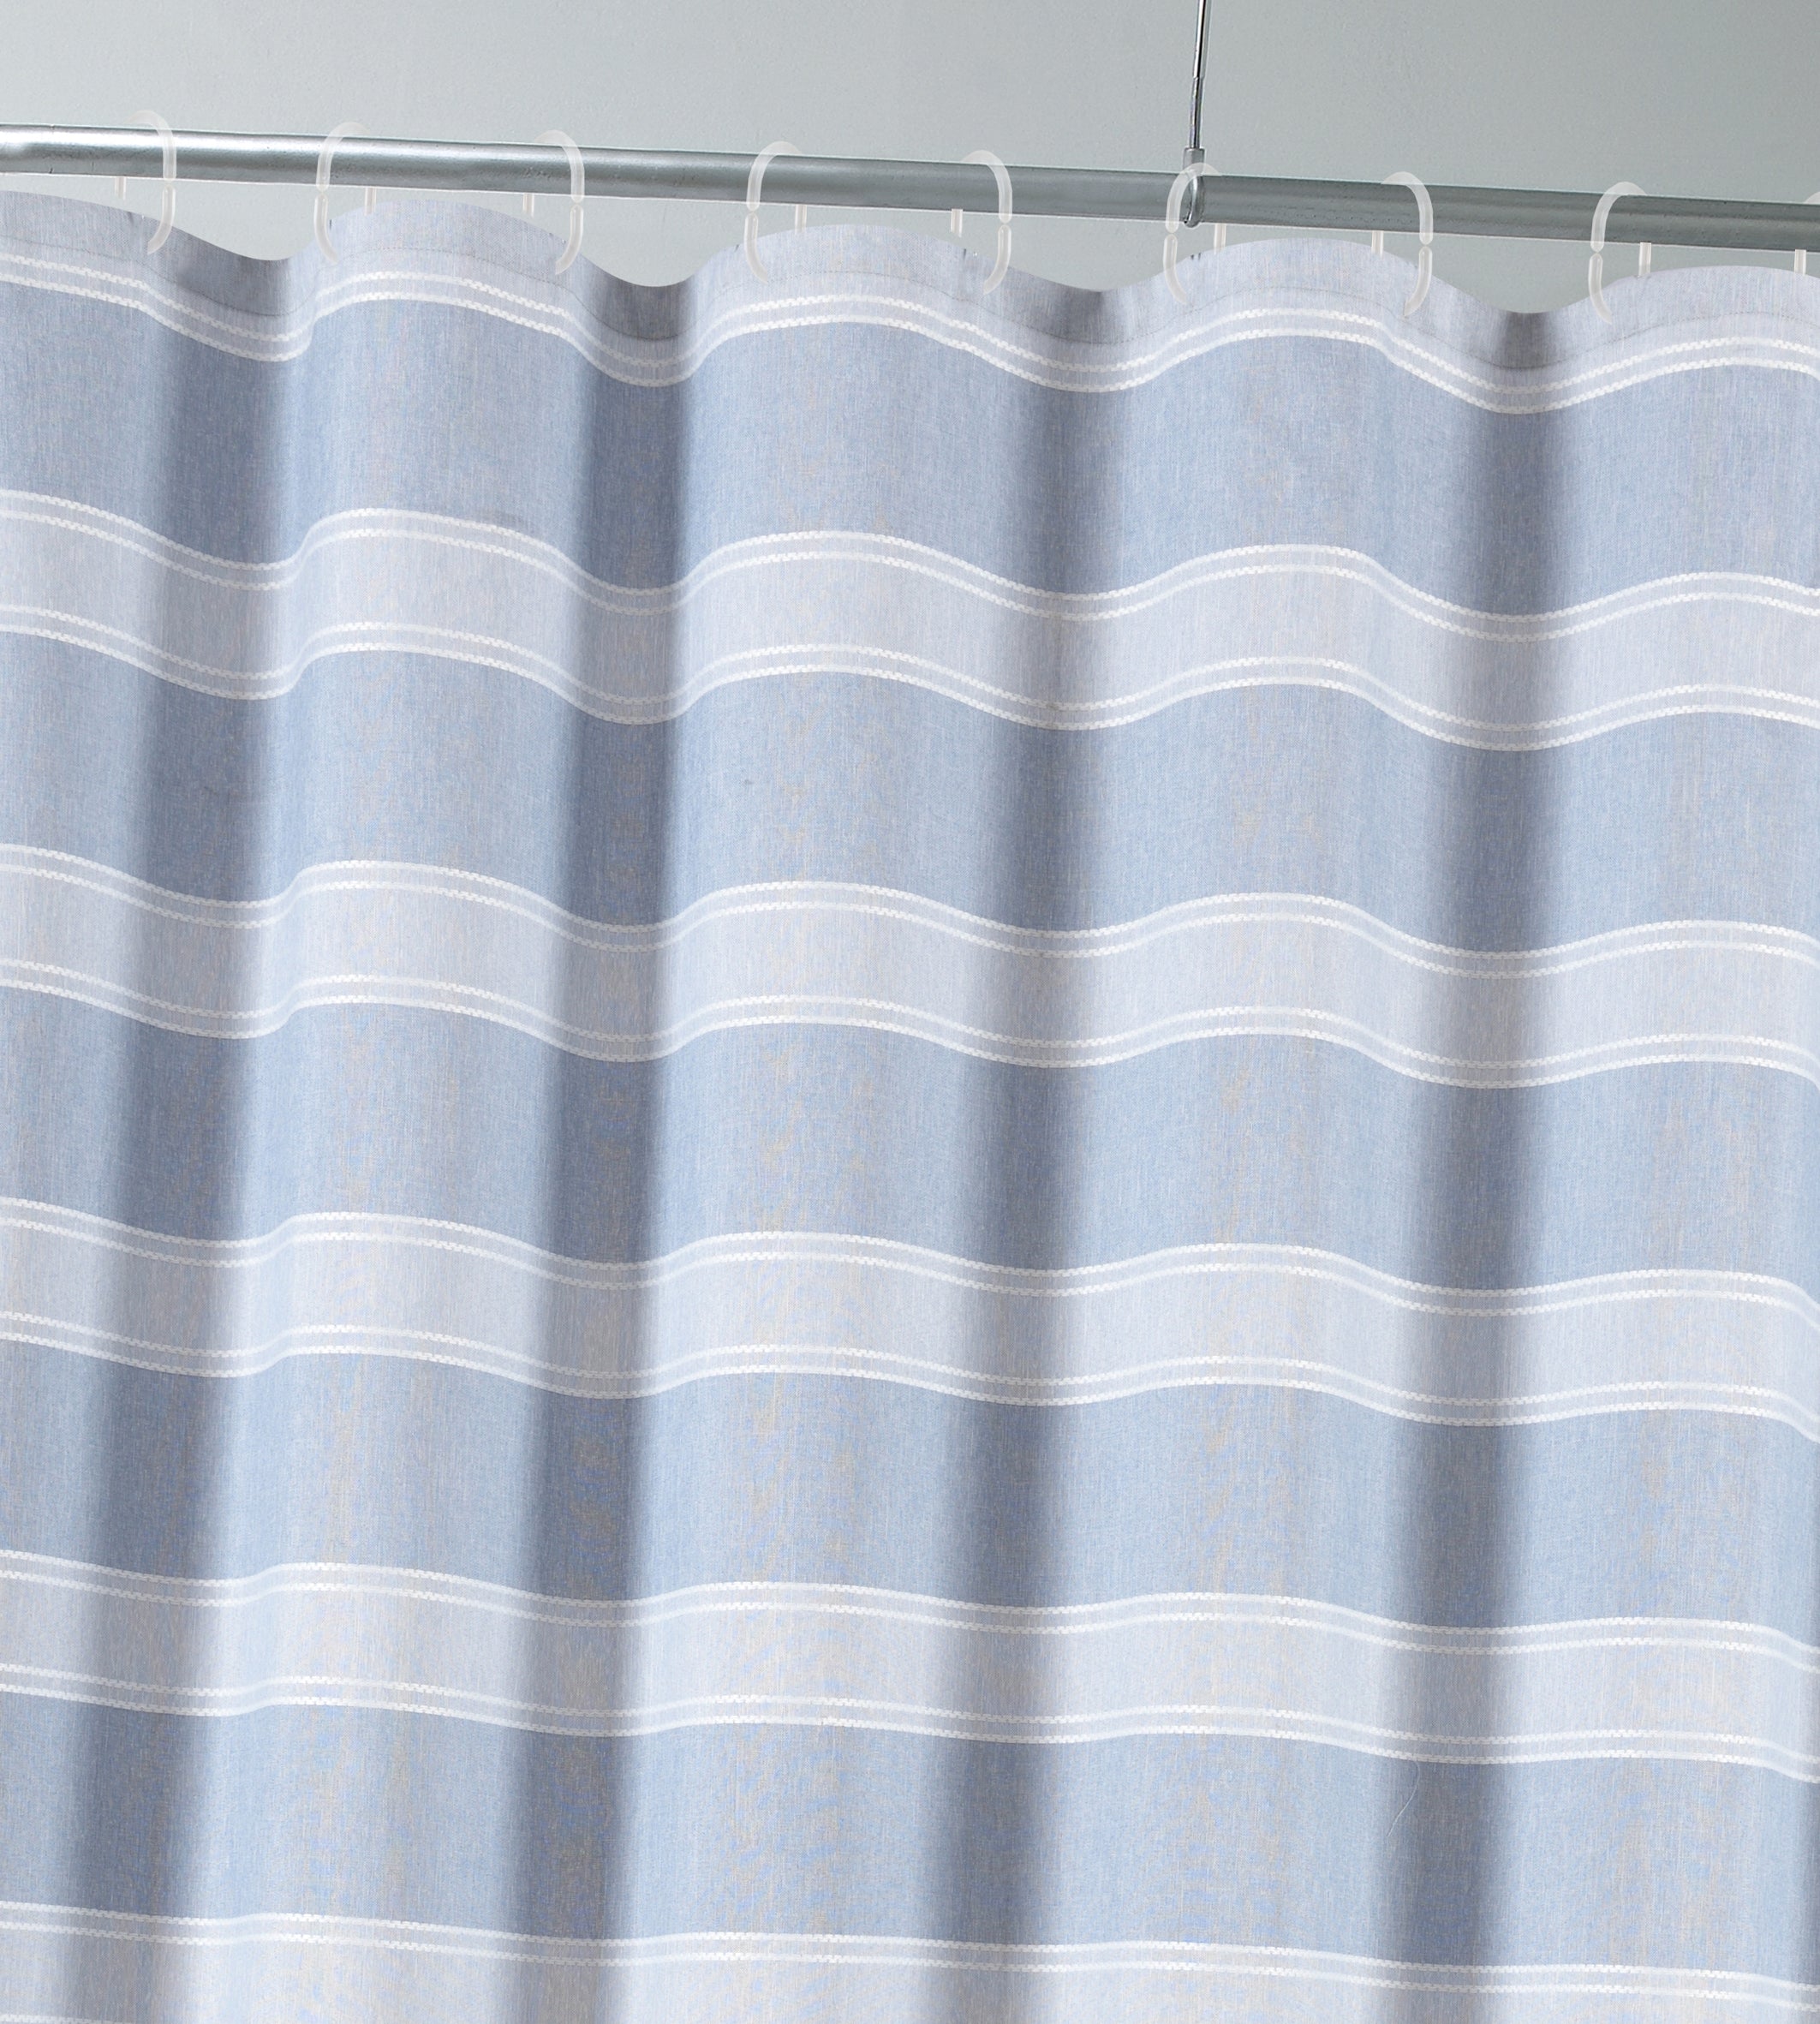 Dainty Home Madison Striped Textured Embossed Weaved Striped Cotton Feel Designed Fabric Shower Curtain